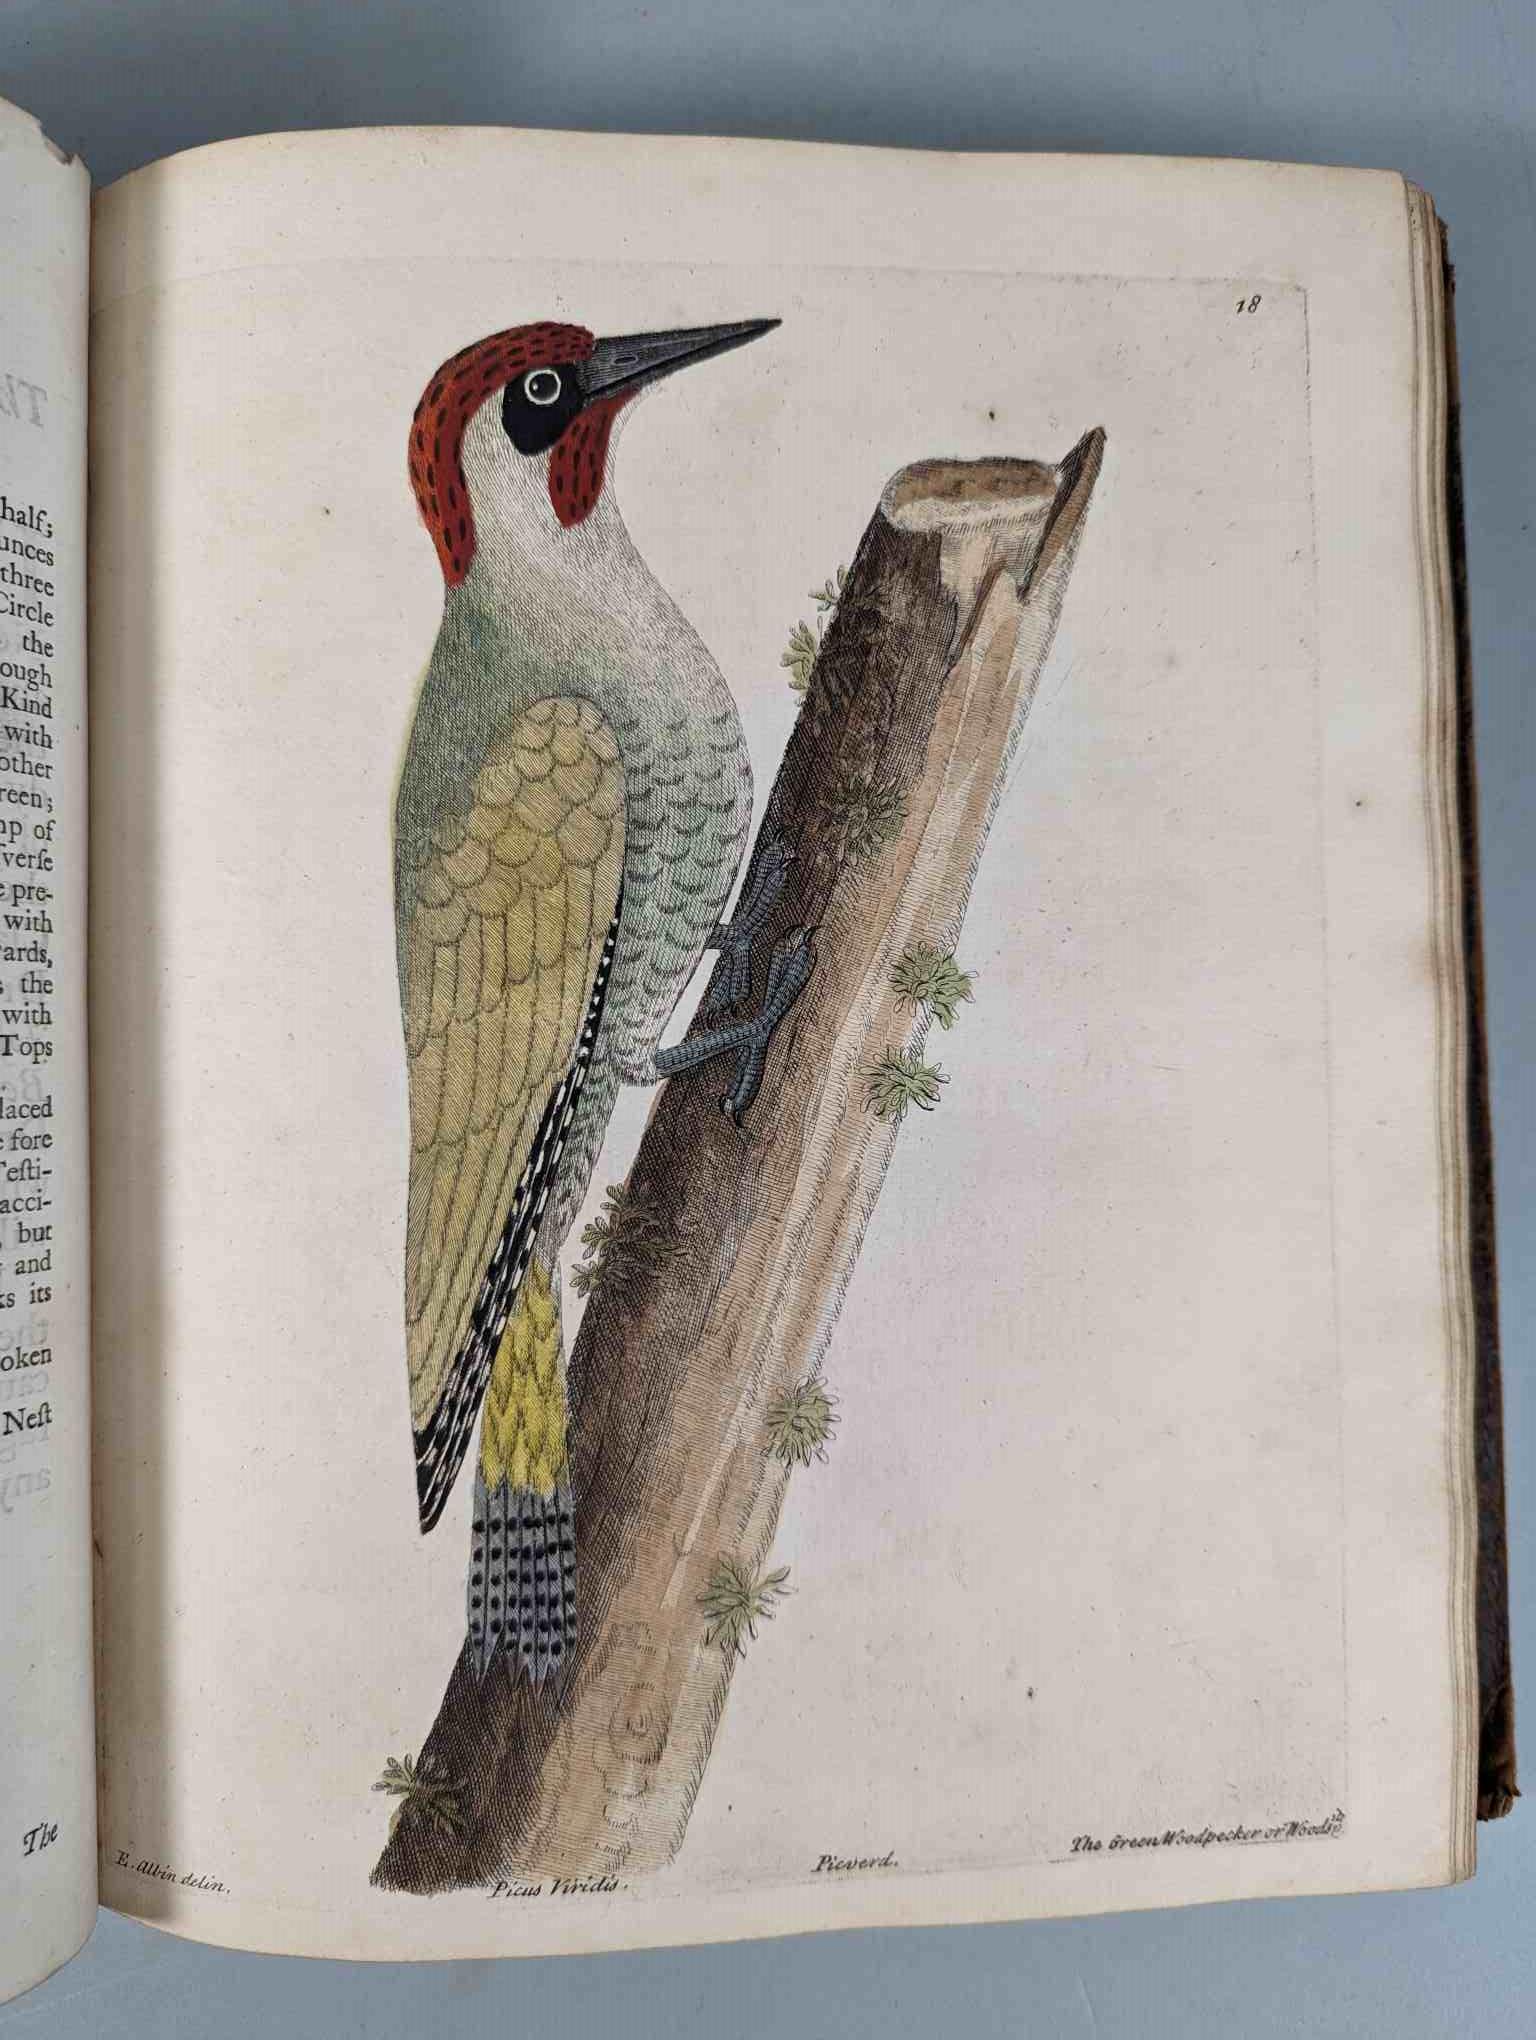 ALBIN, Eleazar. A Natural History of Birds, to which are added, Notes and Observations by W. - Image 21 of 208